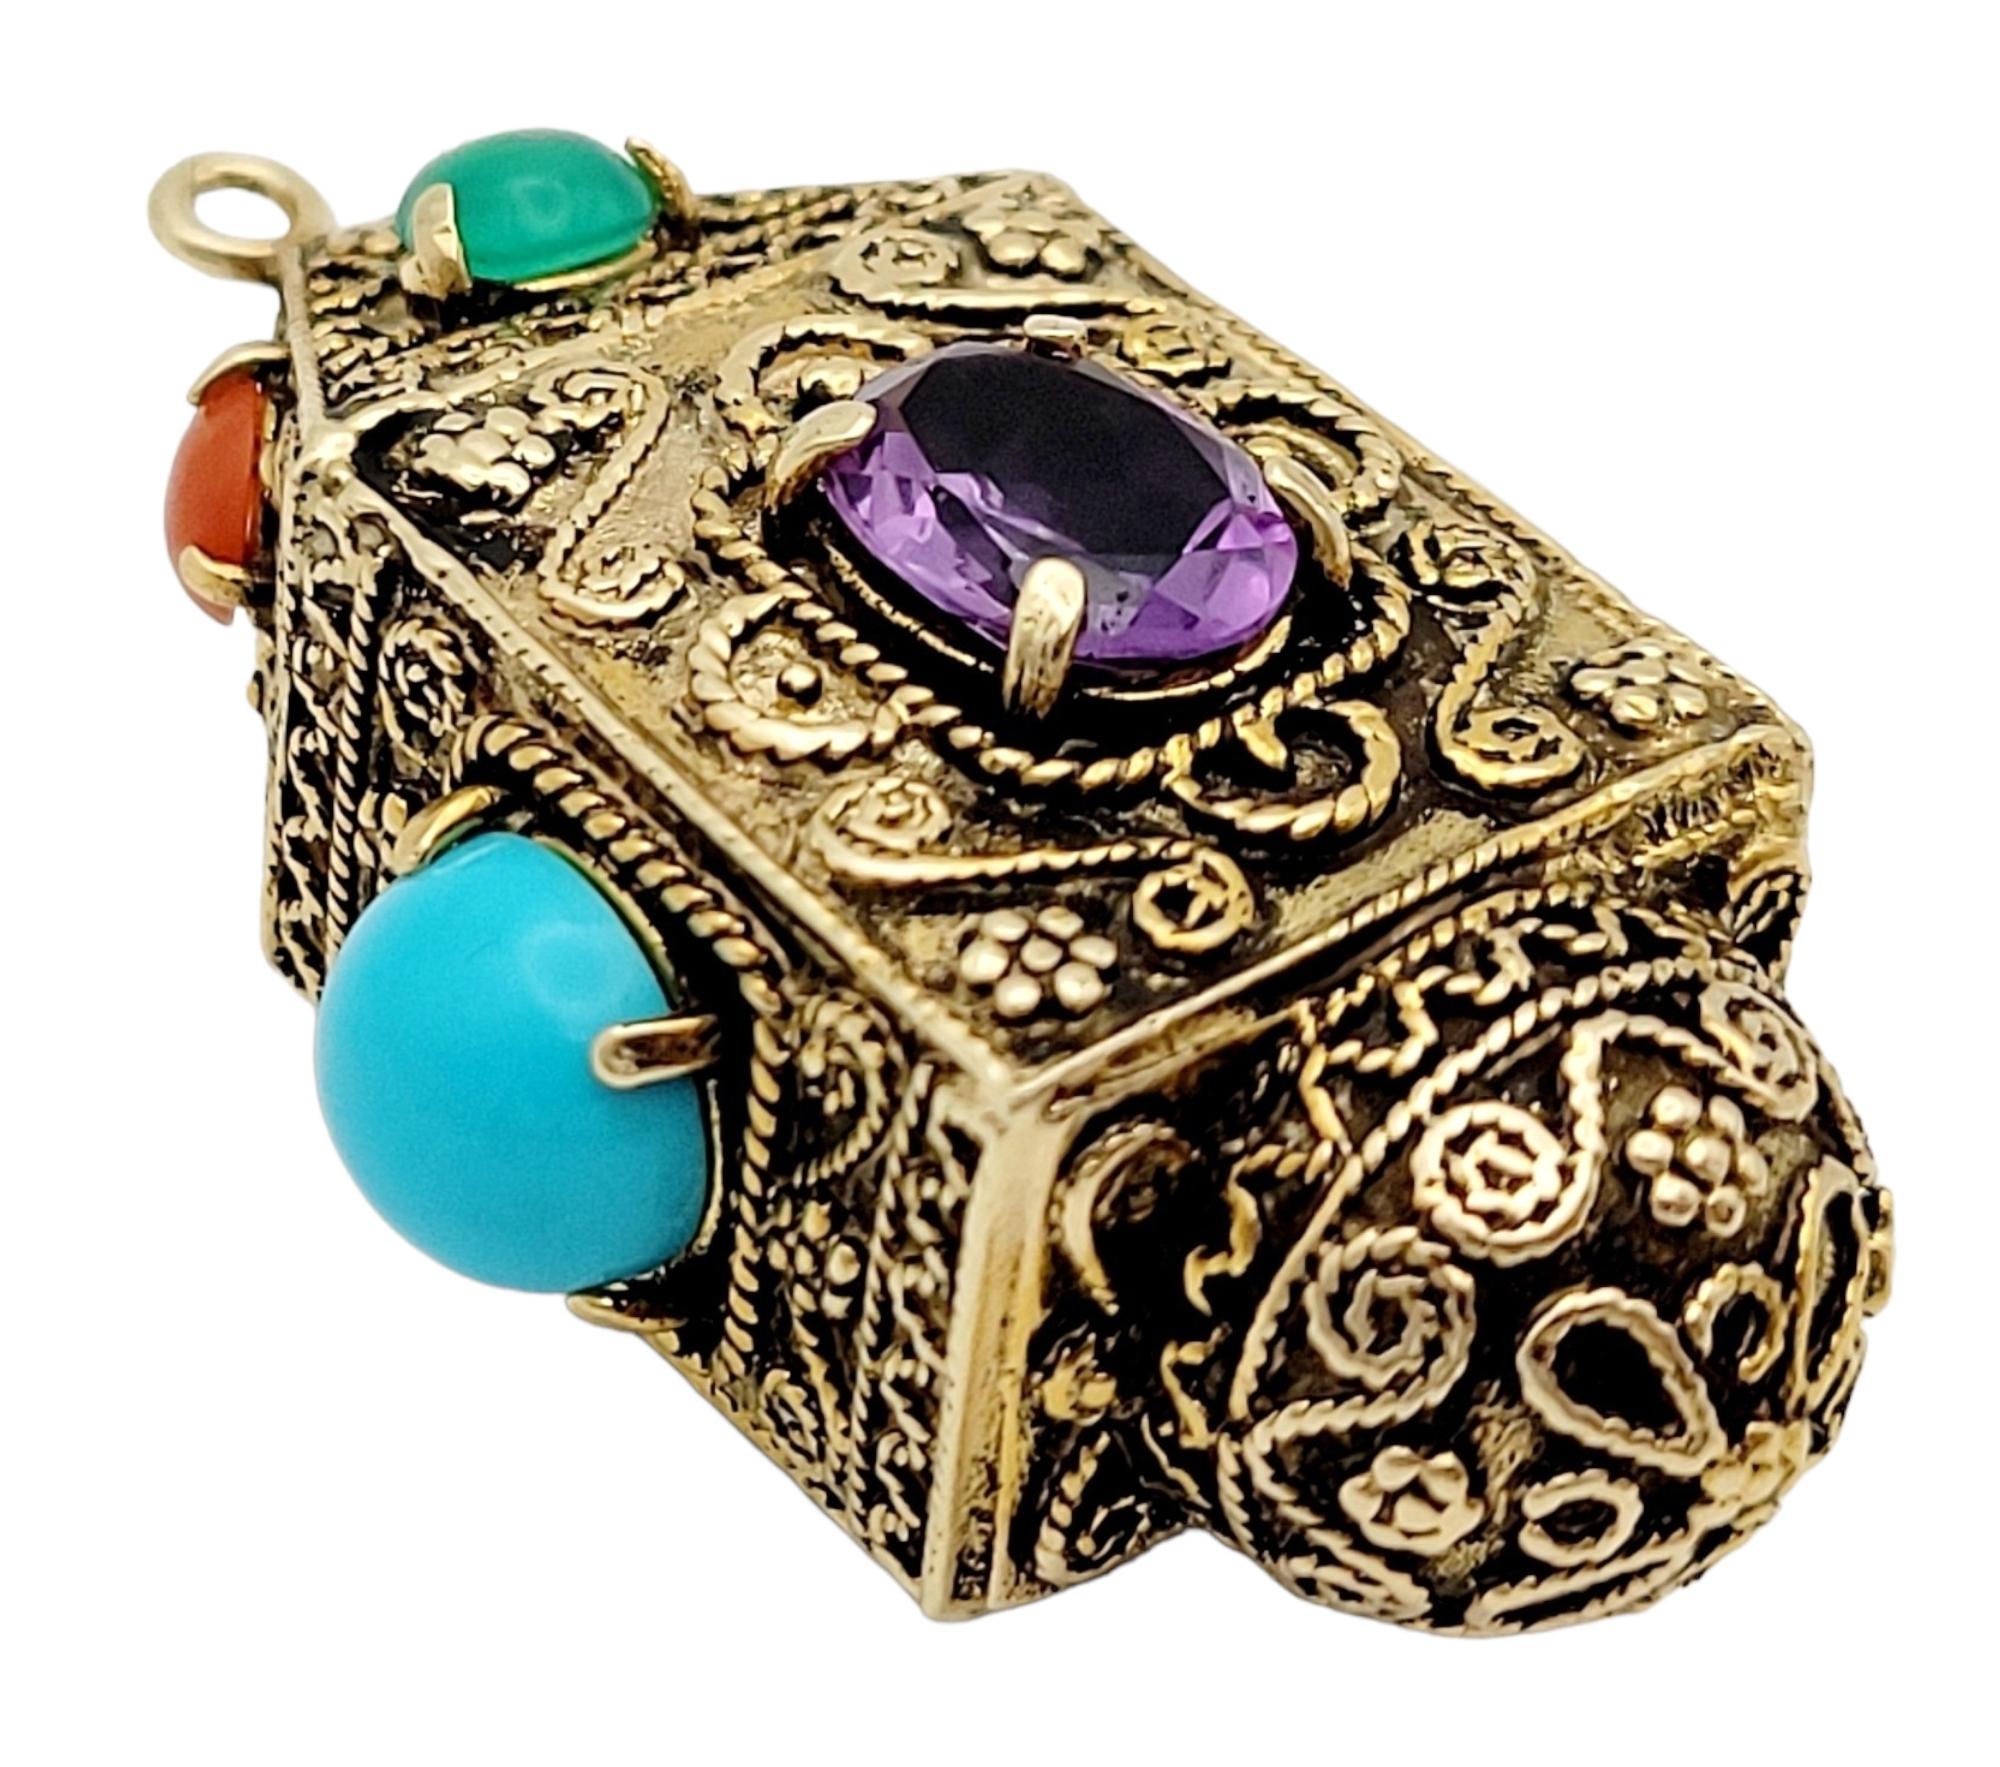 Presenting a stunning vintage amulet pendant crafted in yellow gold and adorned with a vibrant array of gemstones. This exquisite pendant showcases an intricately carved rectangular shape, exuding timeless elegance. The pendant's vertical hanging